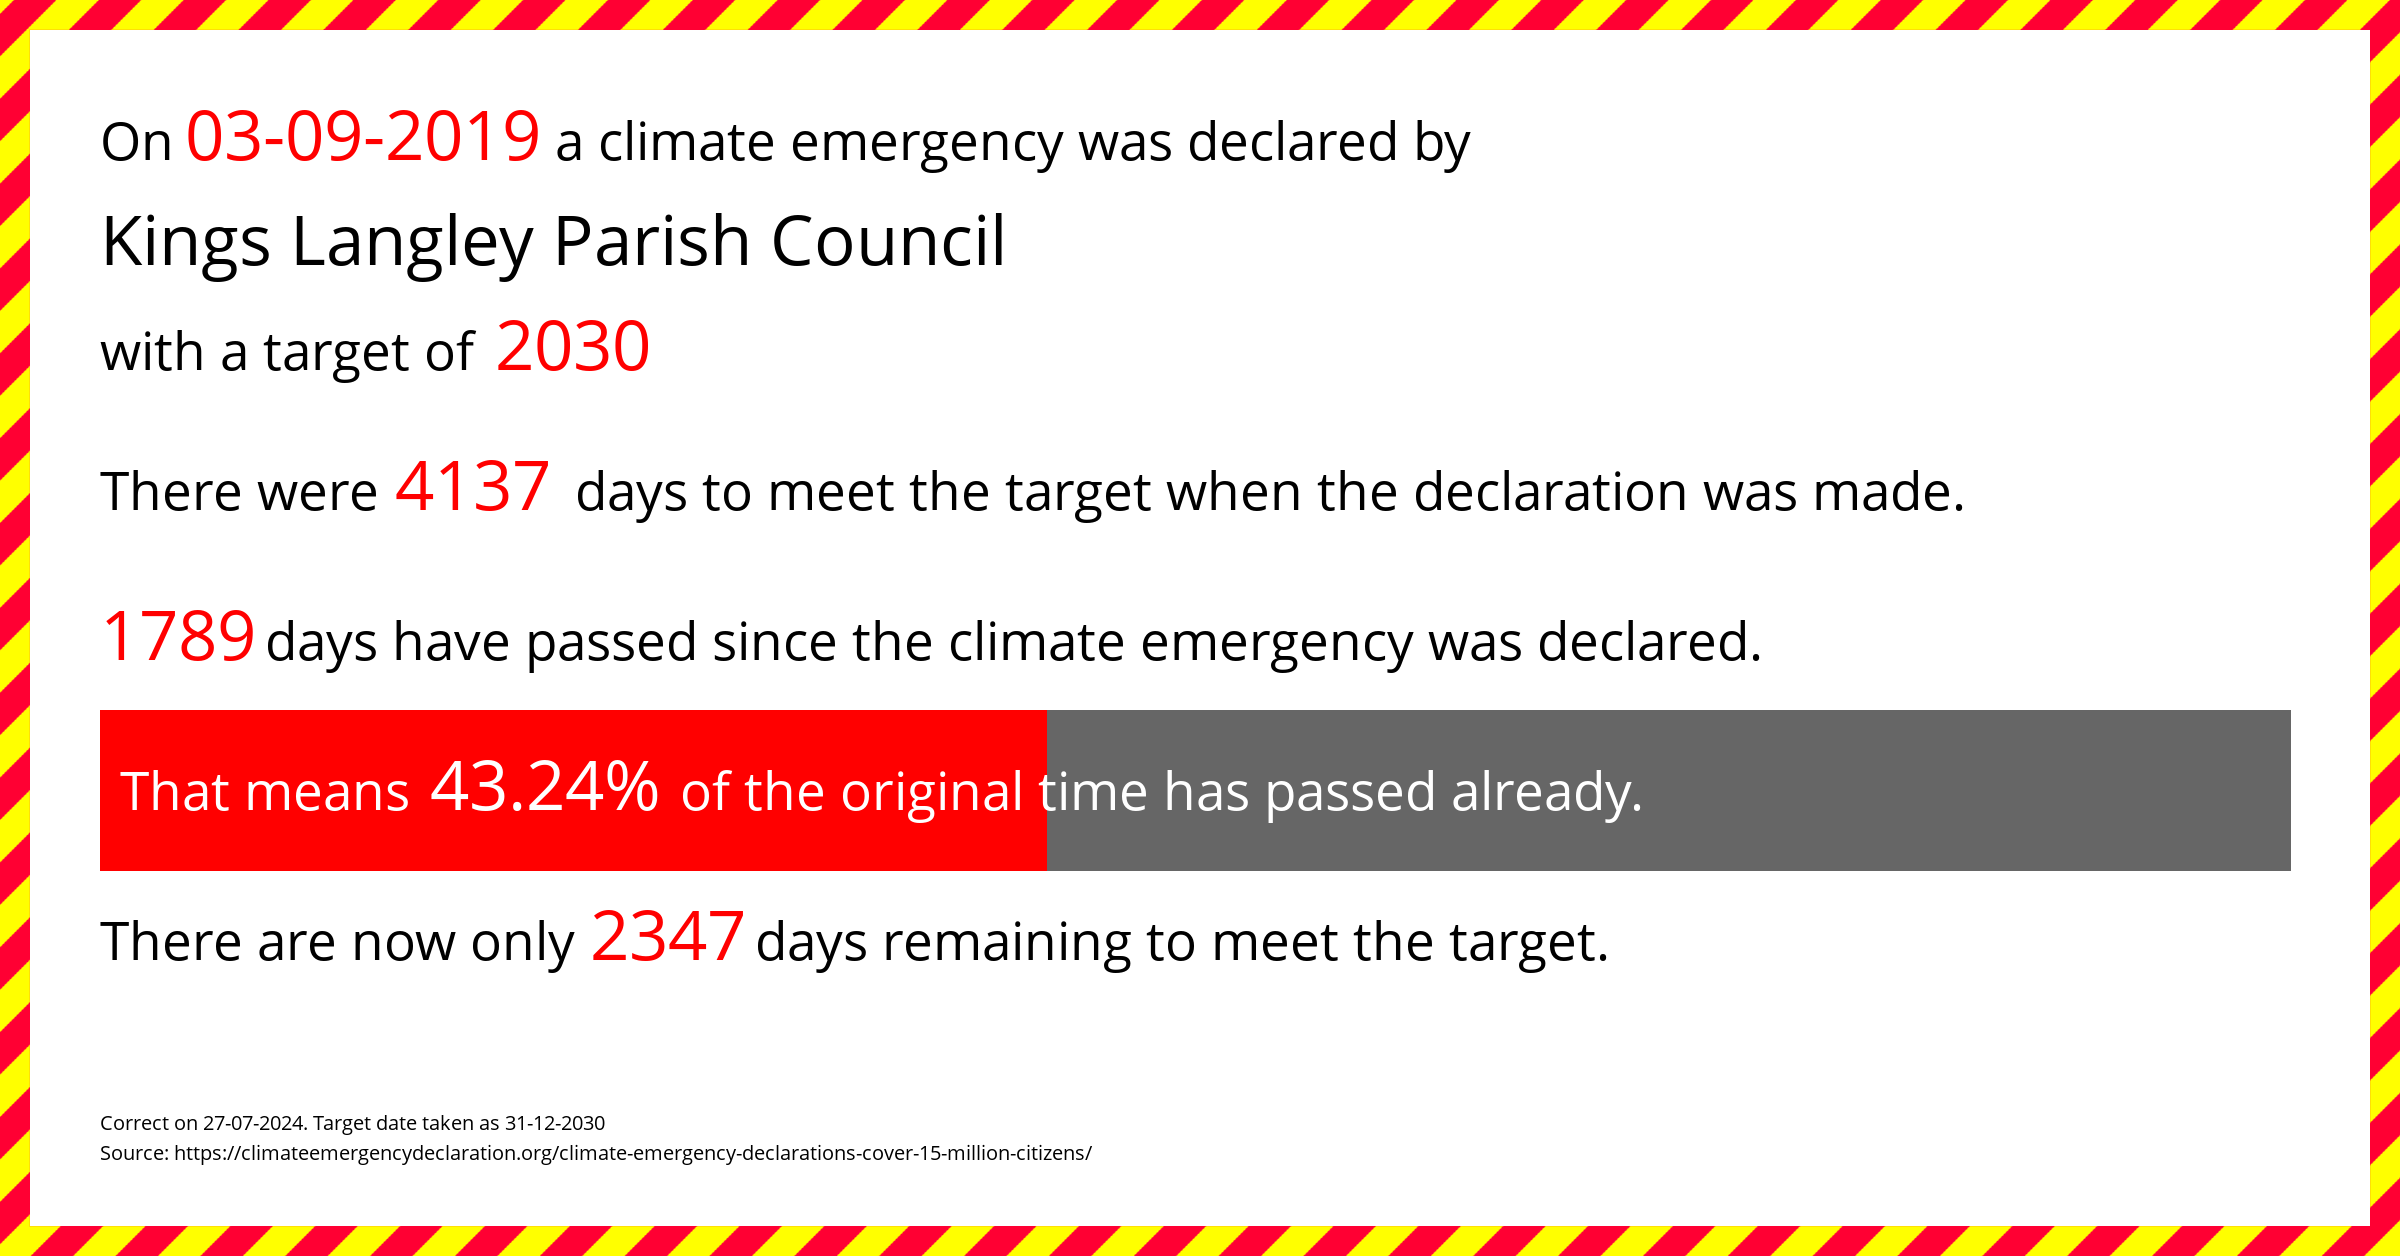 Kings Langley Parish Council  declared a Climate emergency on Tuesday 3rd September 2019, with a target of 2030.